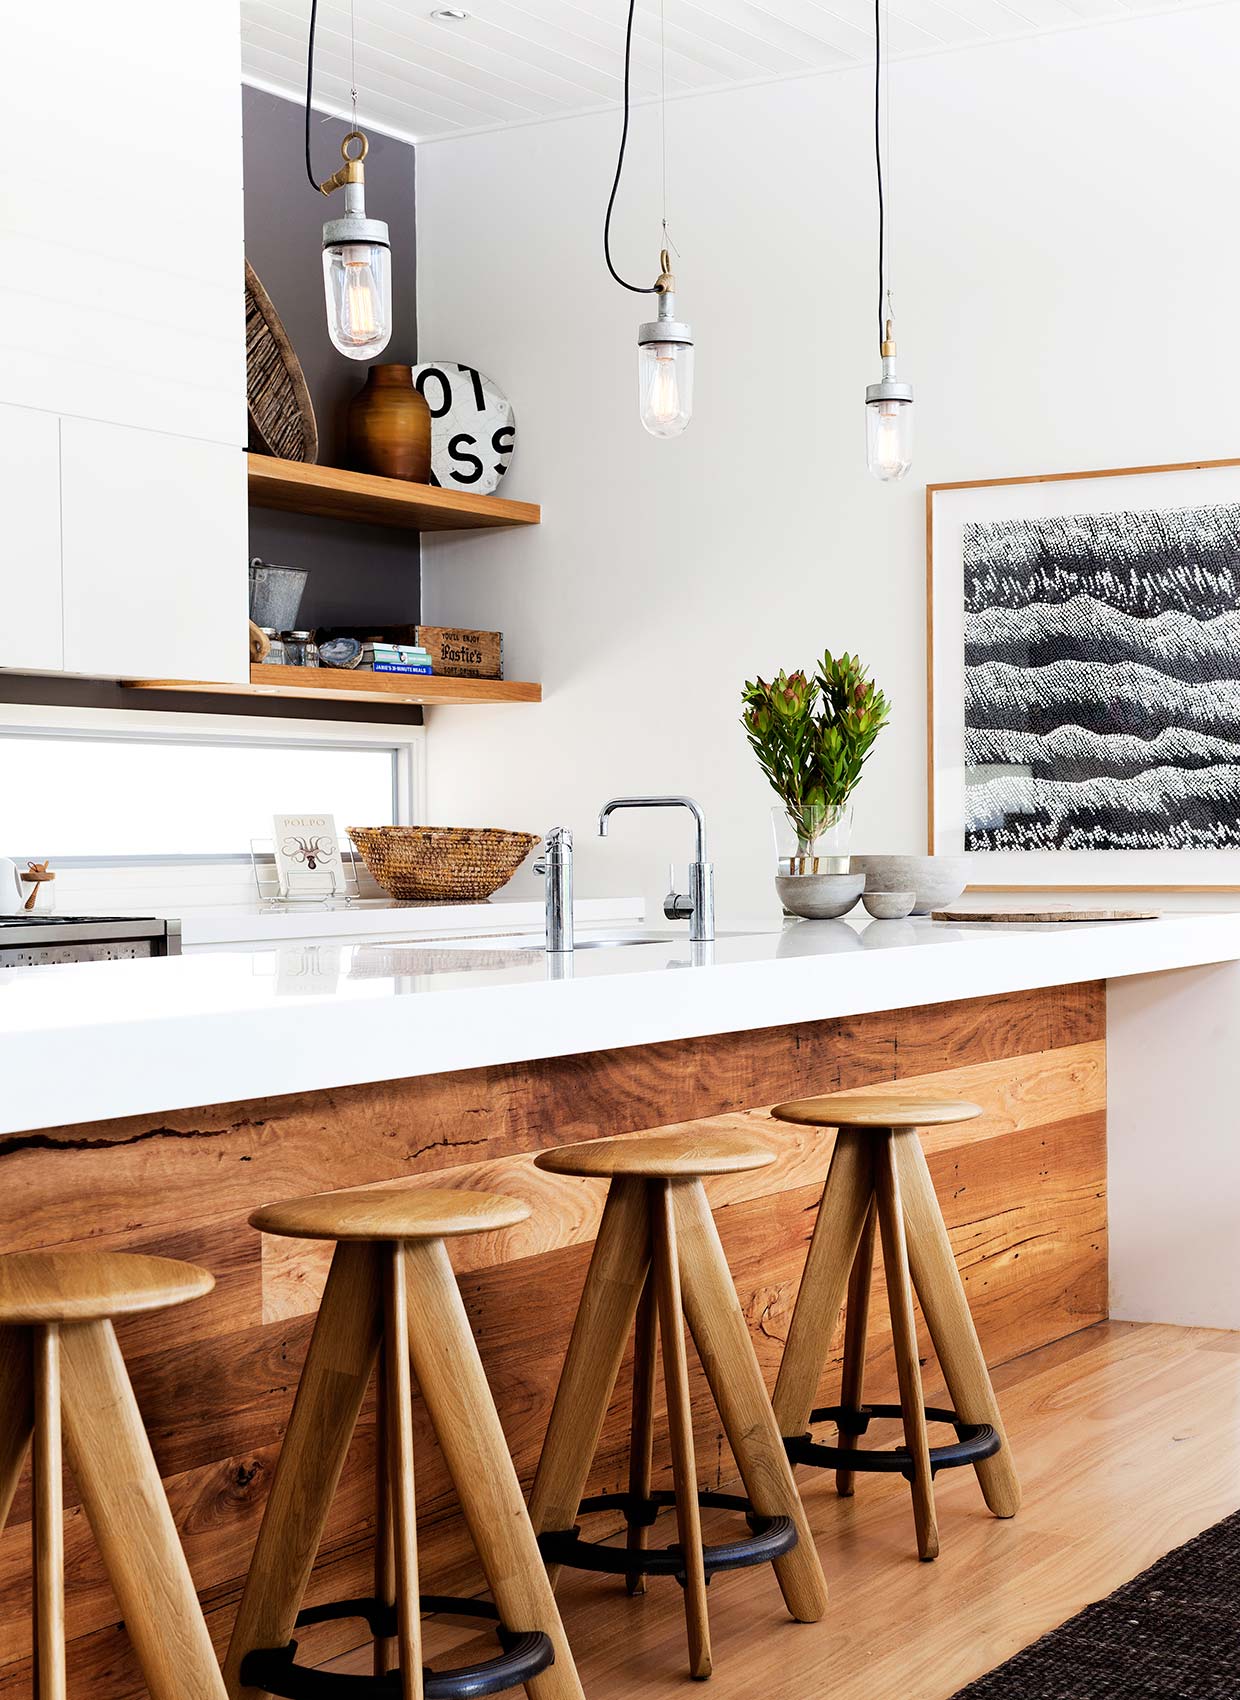 White And Wood Is The Trendiest Combination For Kitchen Design